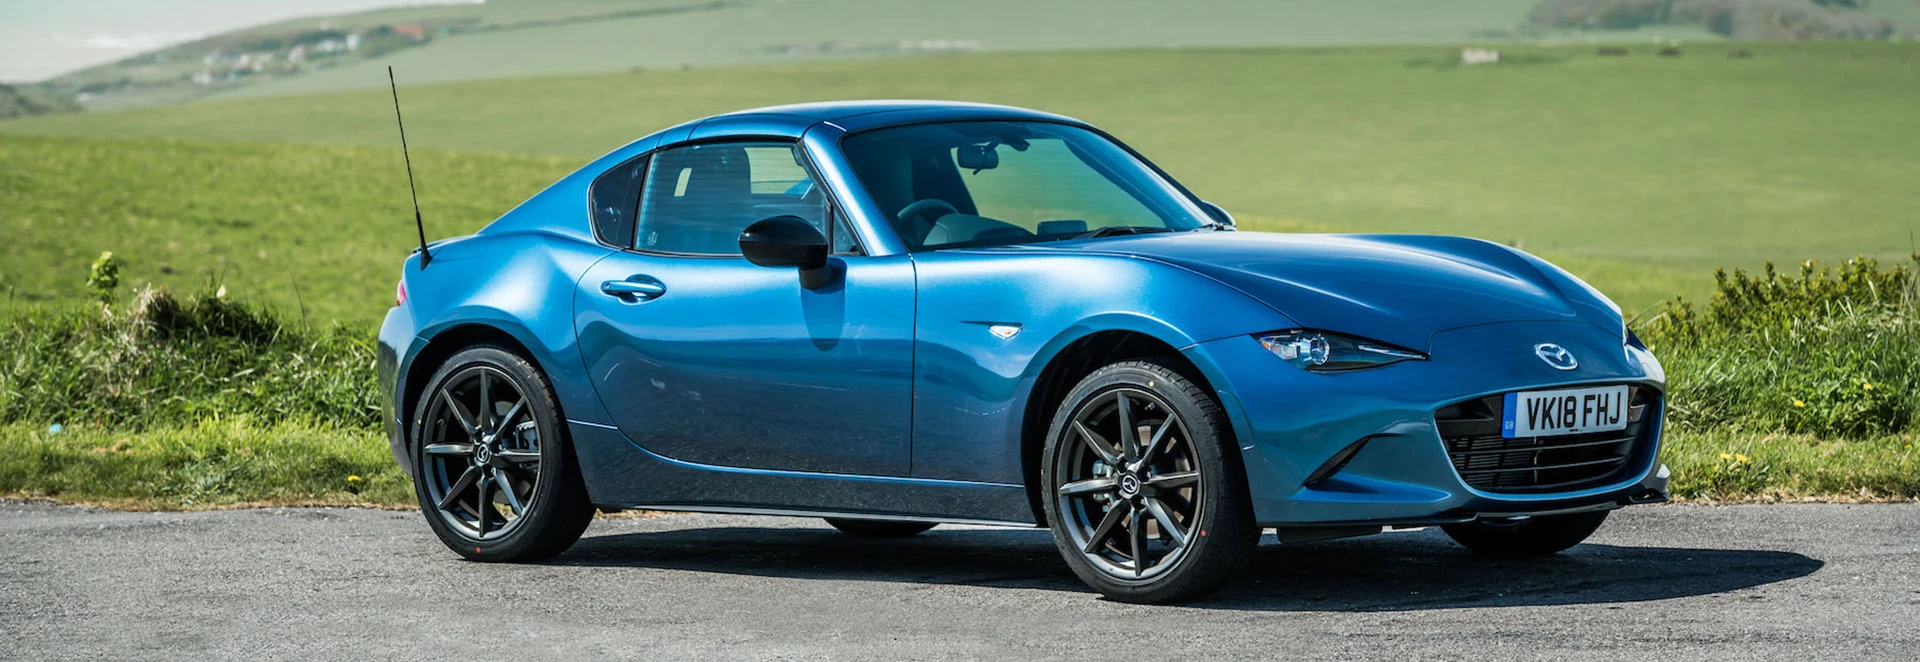 New range-topping grade introduced to the Mazda MX-5 sports car